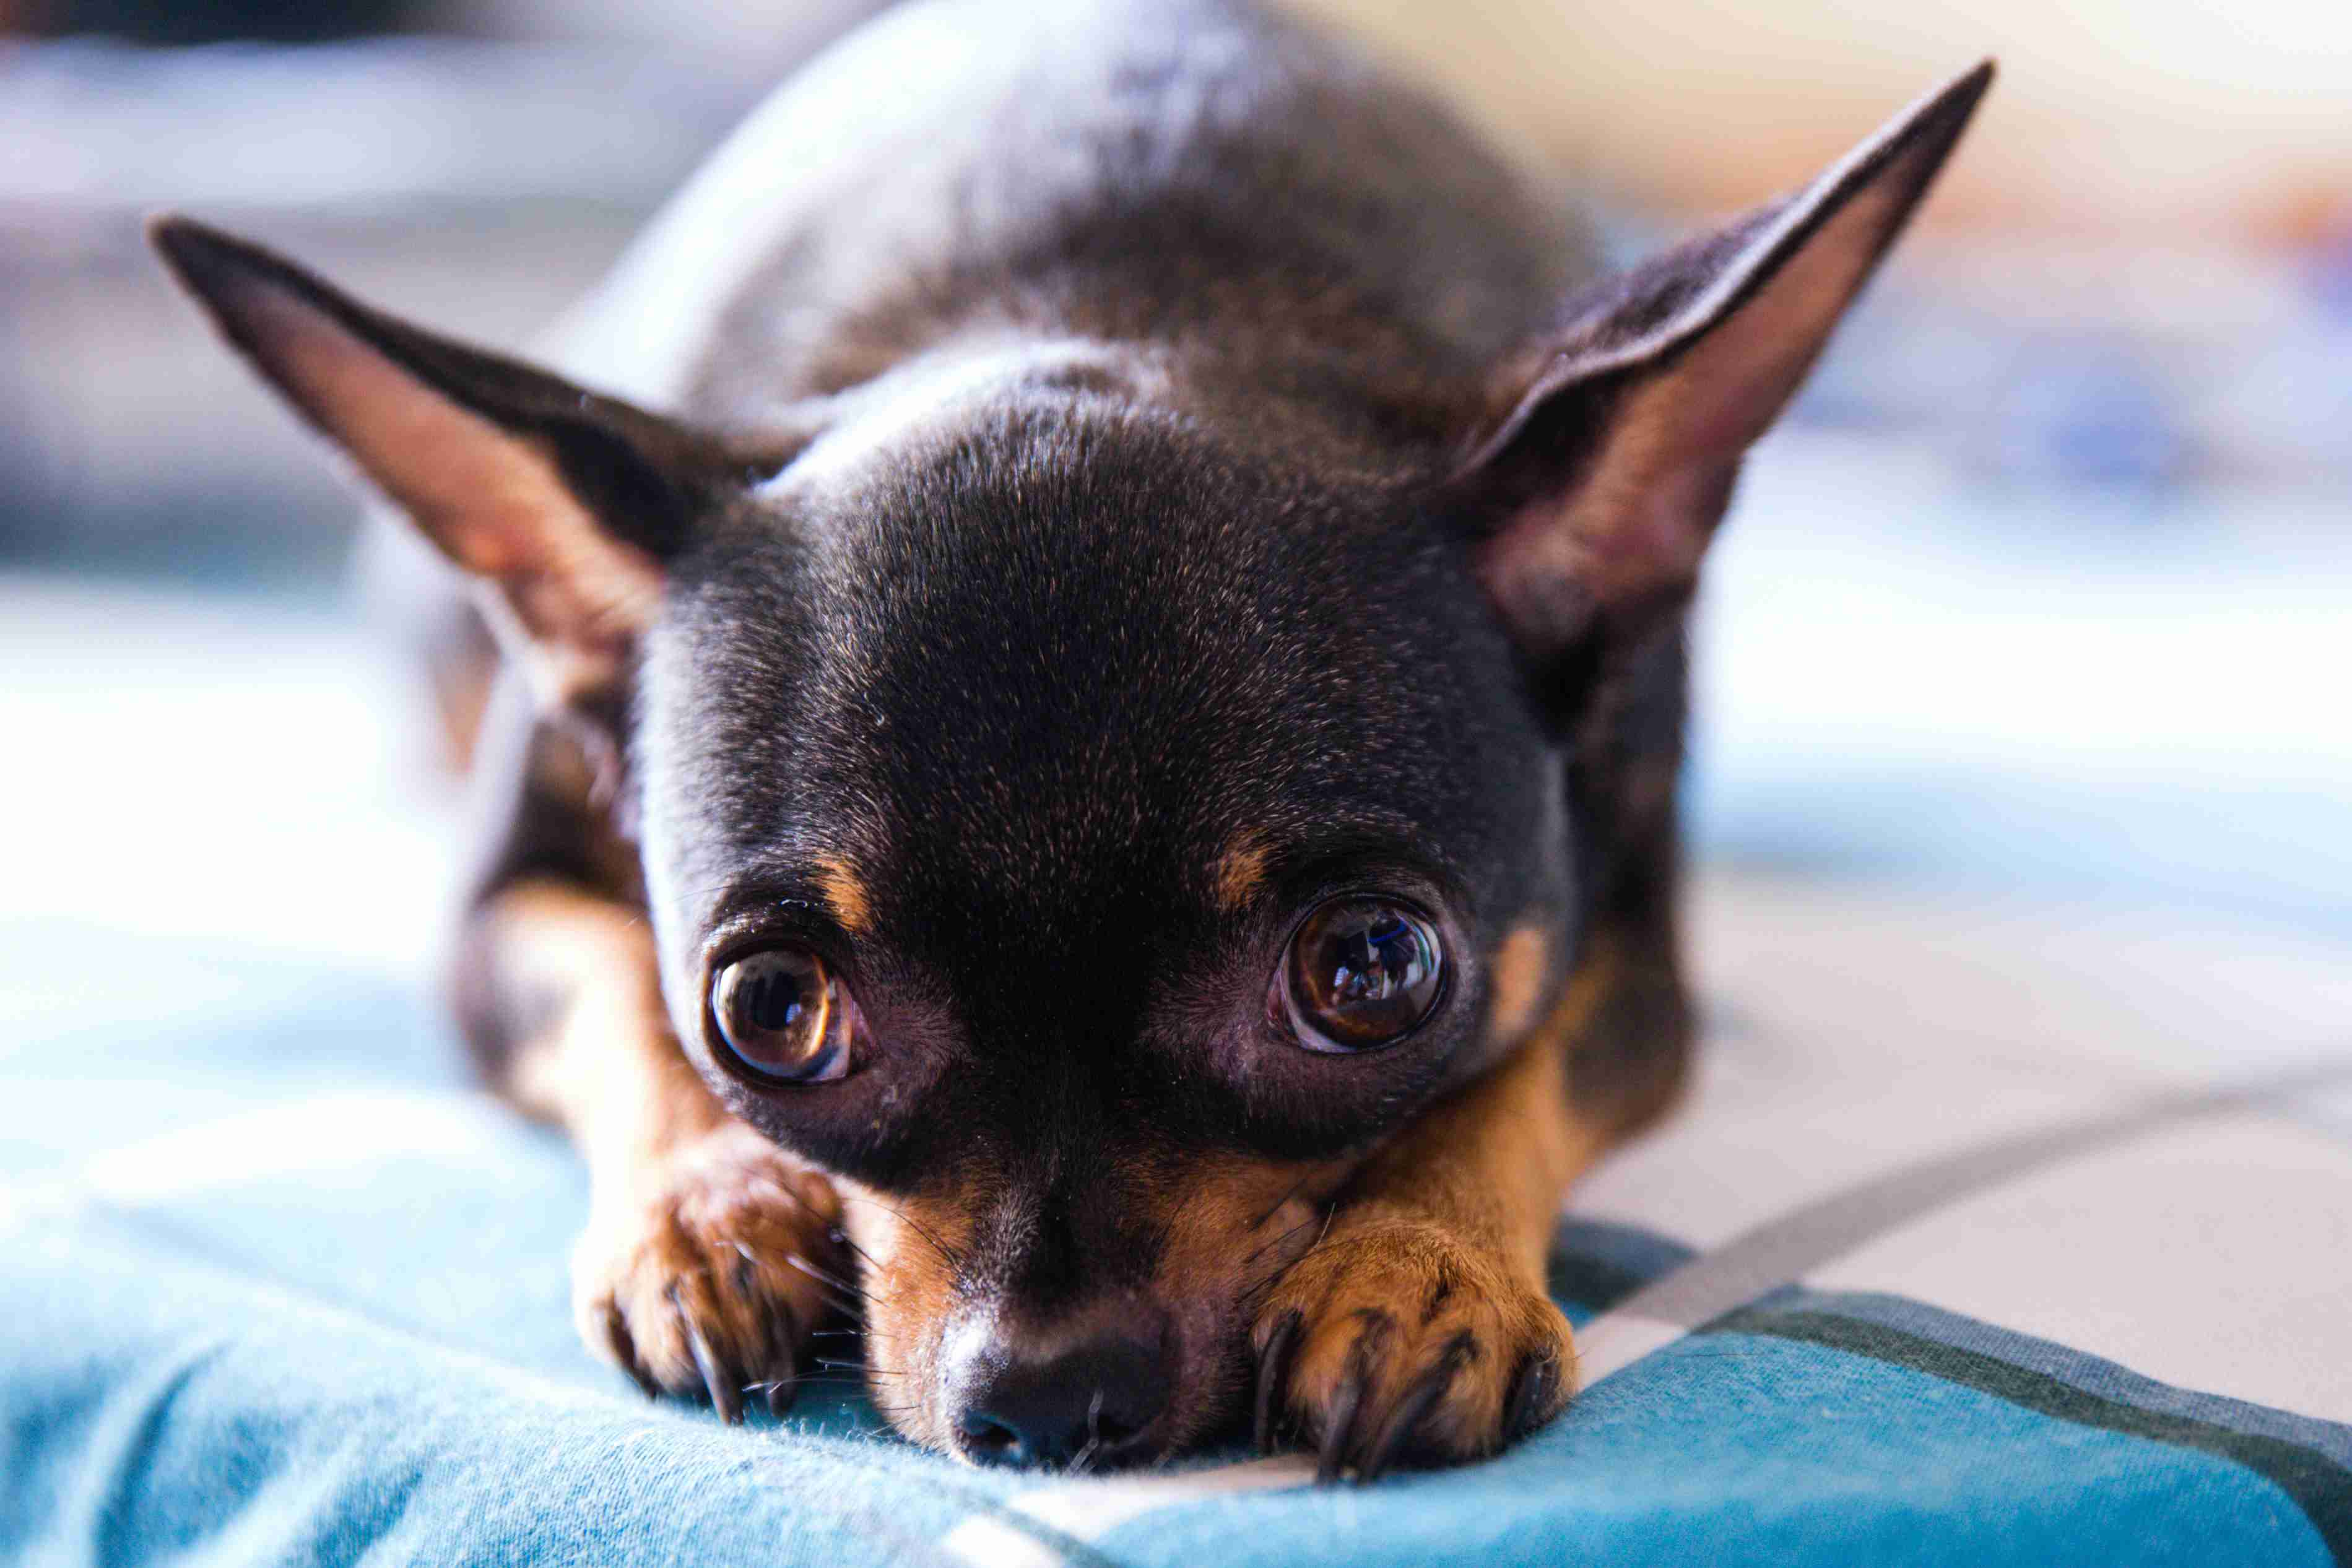 Can Chihuahuas become aggressive towards their owners' romantic partners?